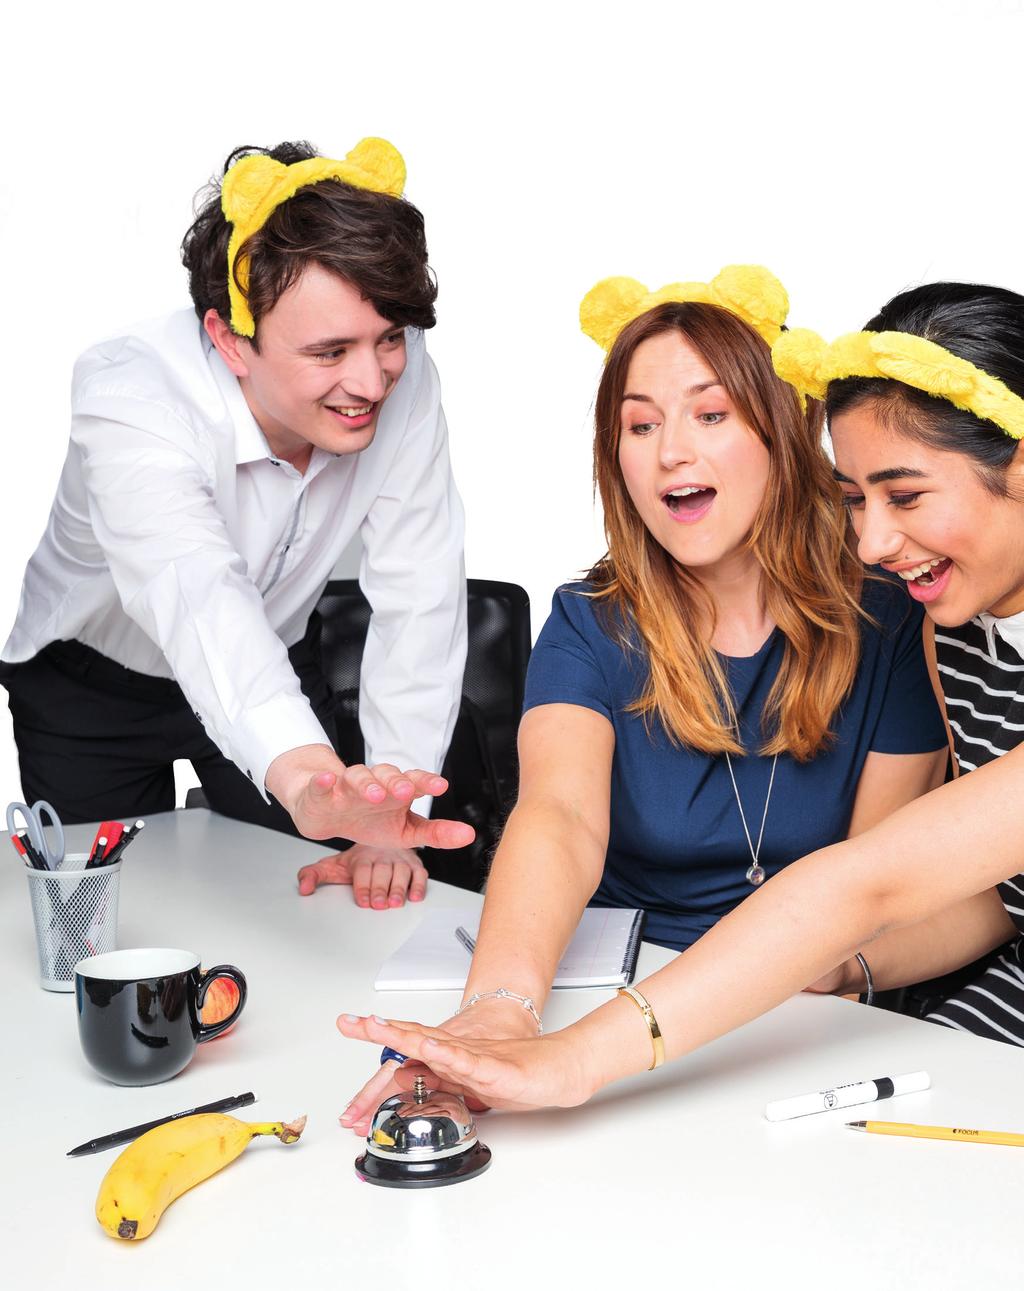 LET S GET Join in the BBC Children in Need video quiz with rounds from BBC Sport, BBC Children s, BBC Radio and many more. There s head-scratching fun guaranteed!